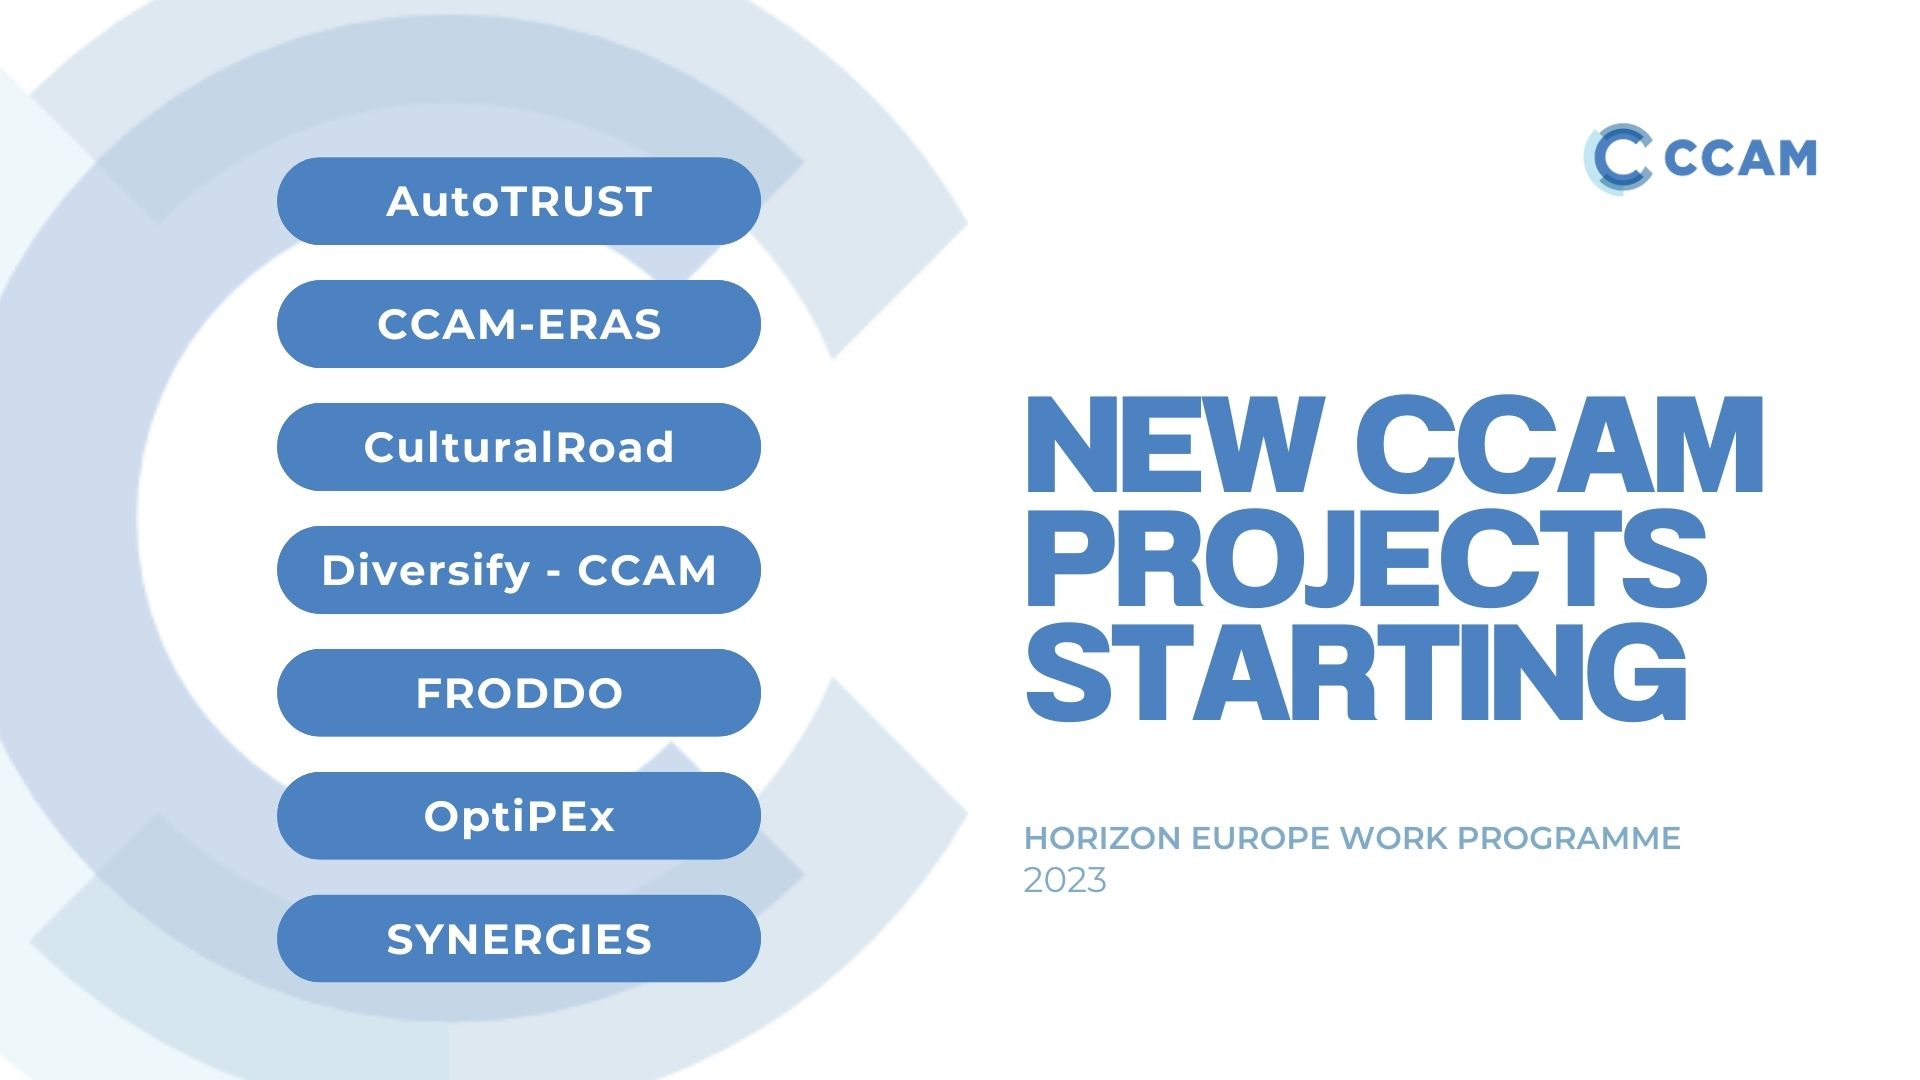 7 newly started CCAM projects